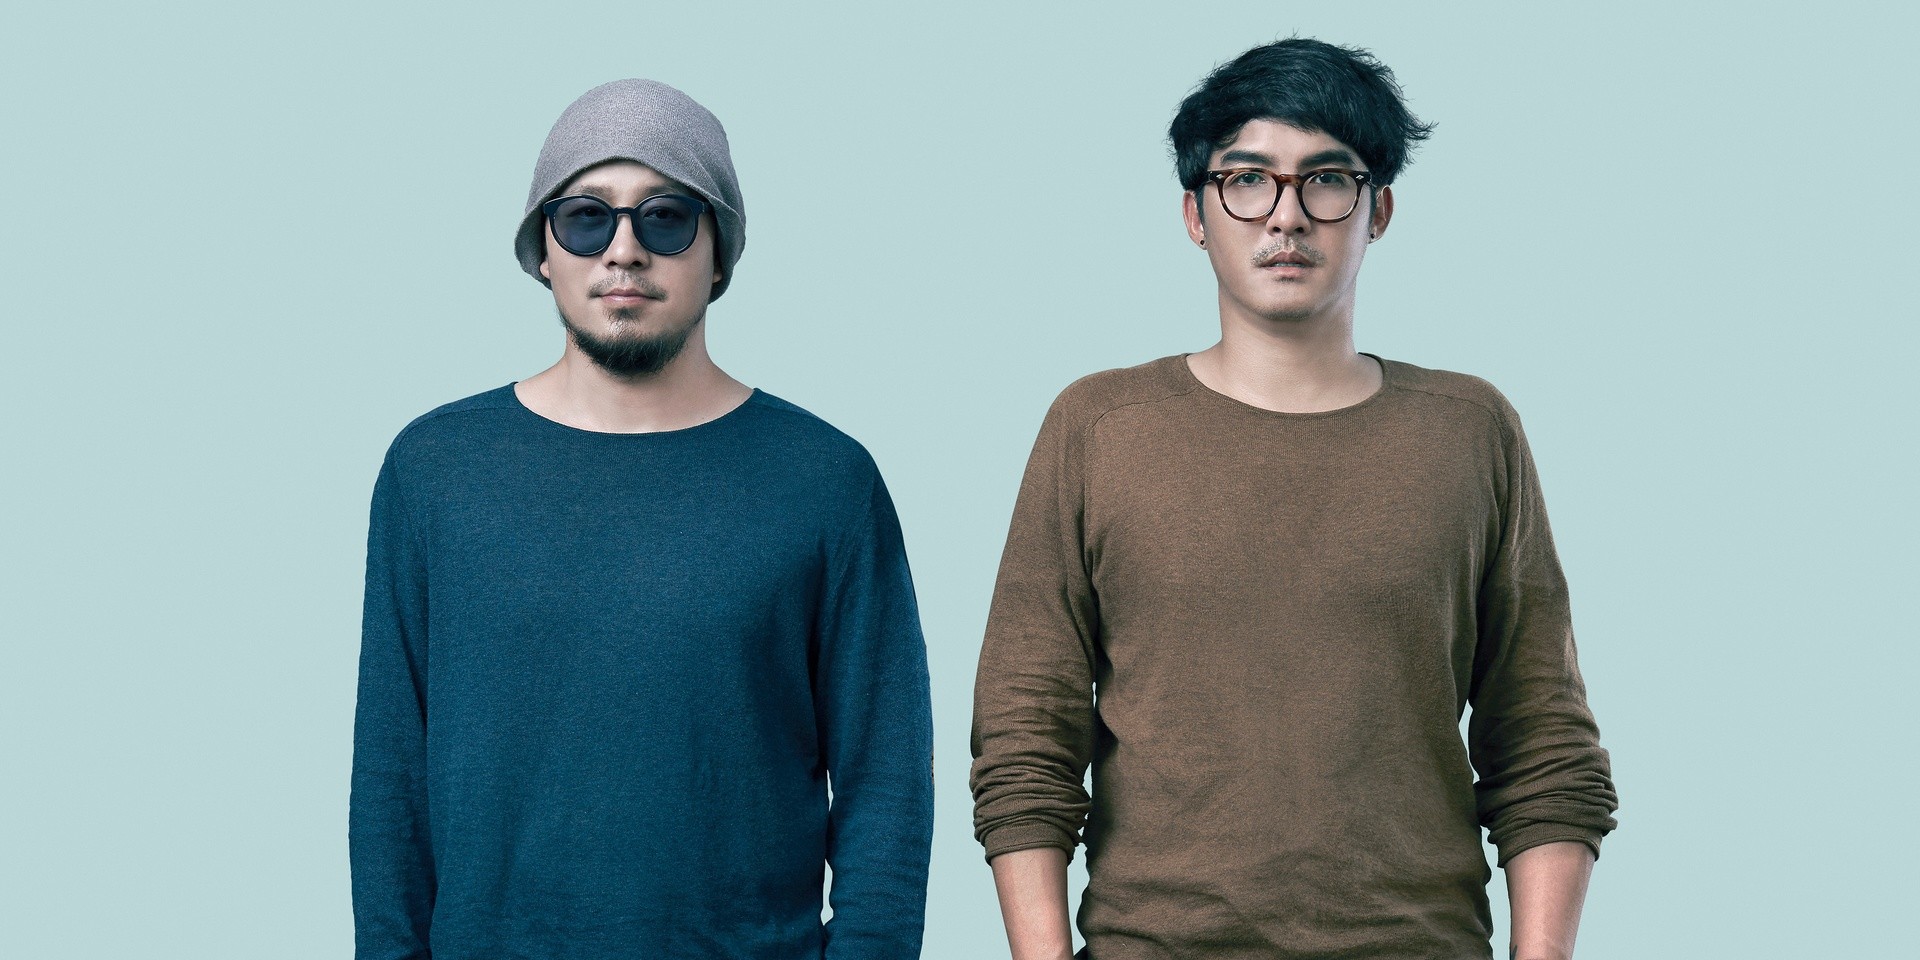 "There are no boundaries in music": Thai band Scrubb on inspiring 2gether: The Series, crossing borders, and connecting with Ben&Ben